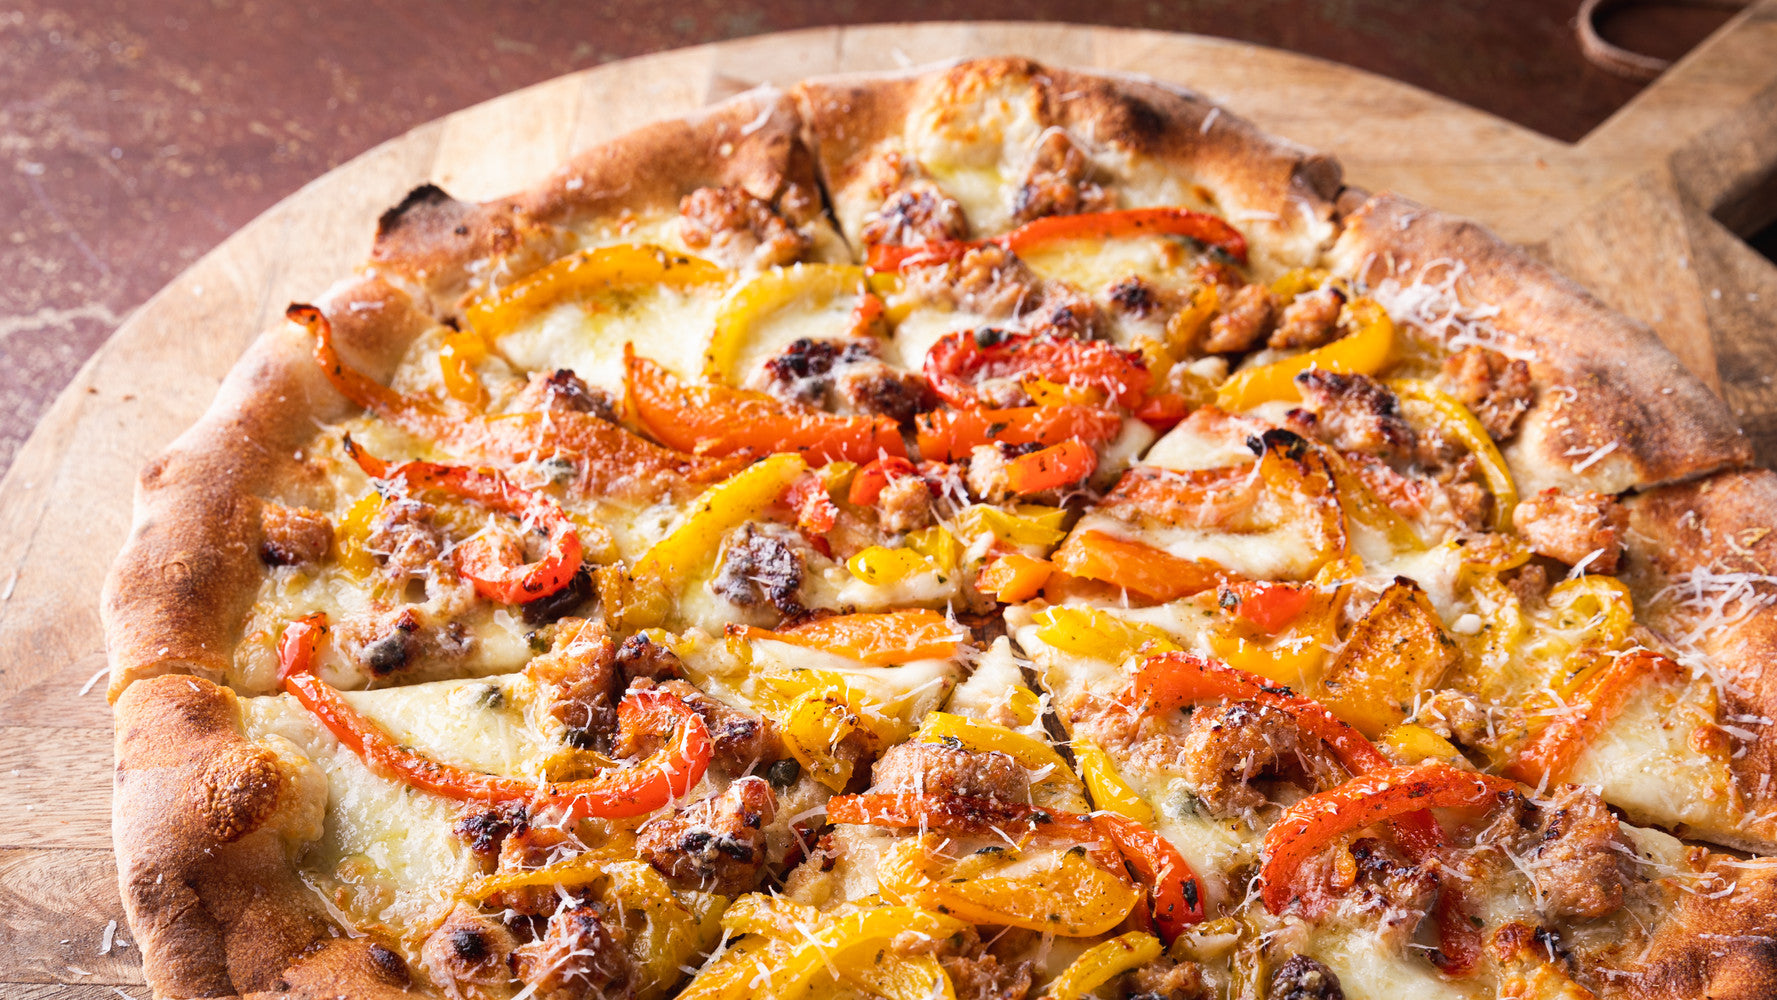 Sausage and Peppers Pizza - Gozney recipes - pizza oven